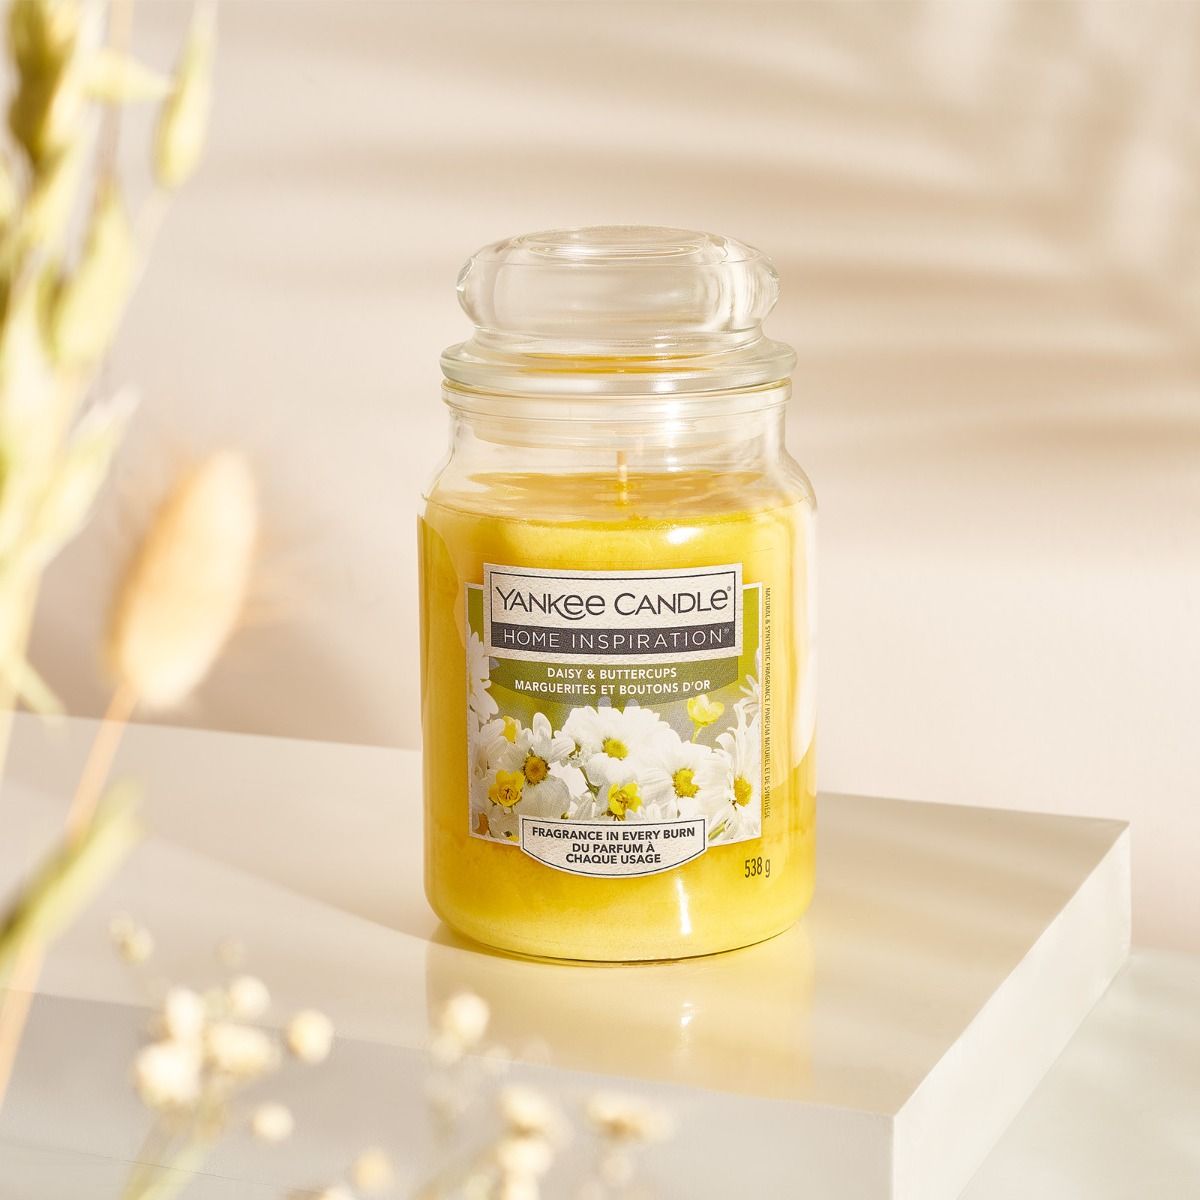 Yankee Candle Home Inspiration Large Jar - Daisy & Buttercups